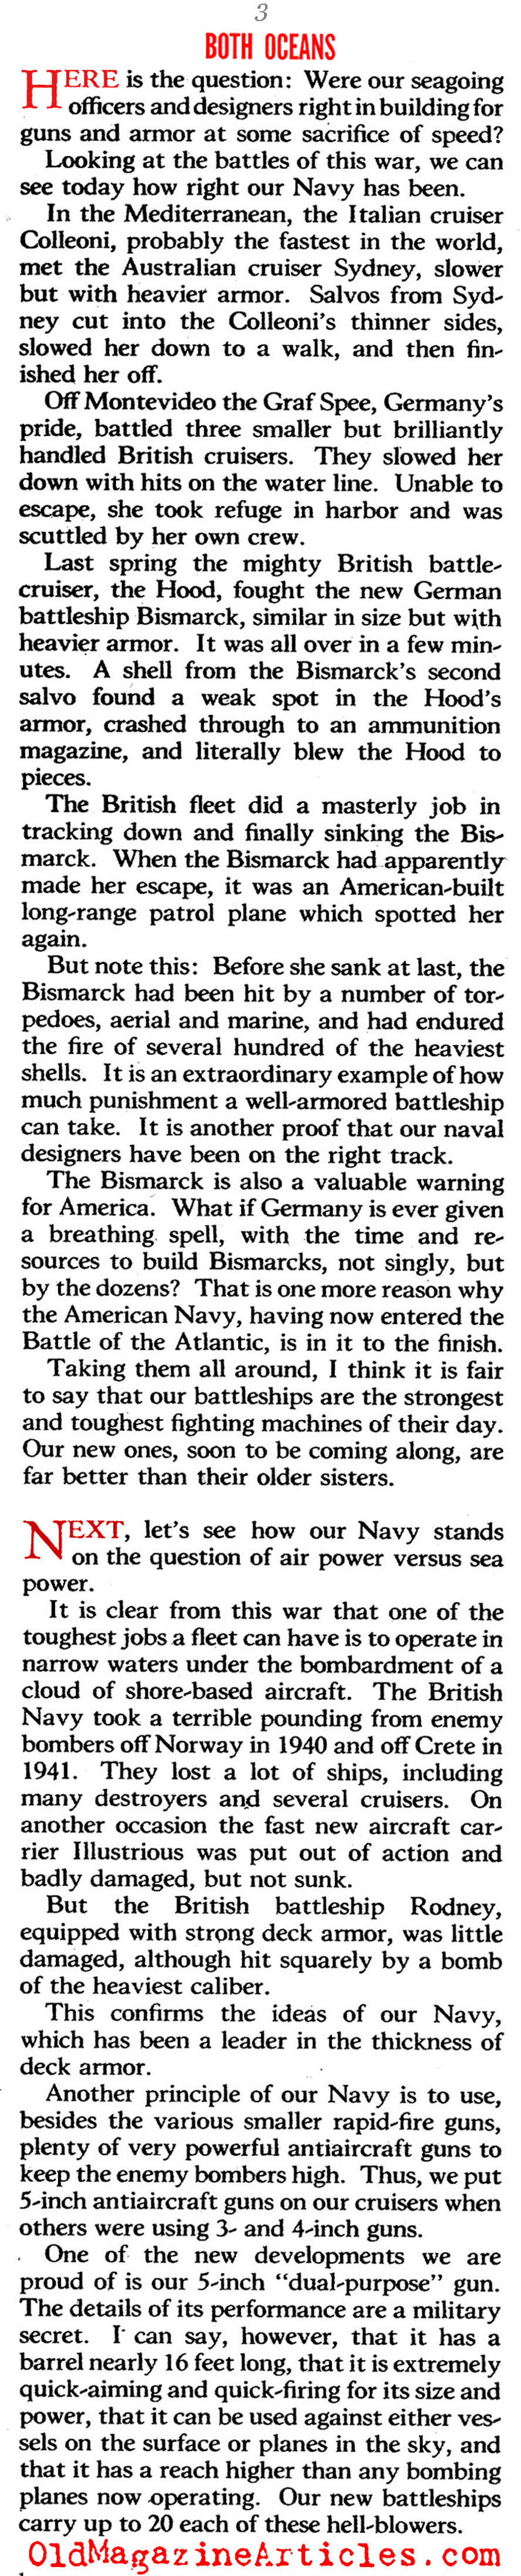 ''We Can Win On Both Oceans'' (The American Magazine, 1942)